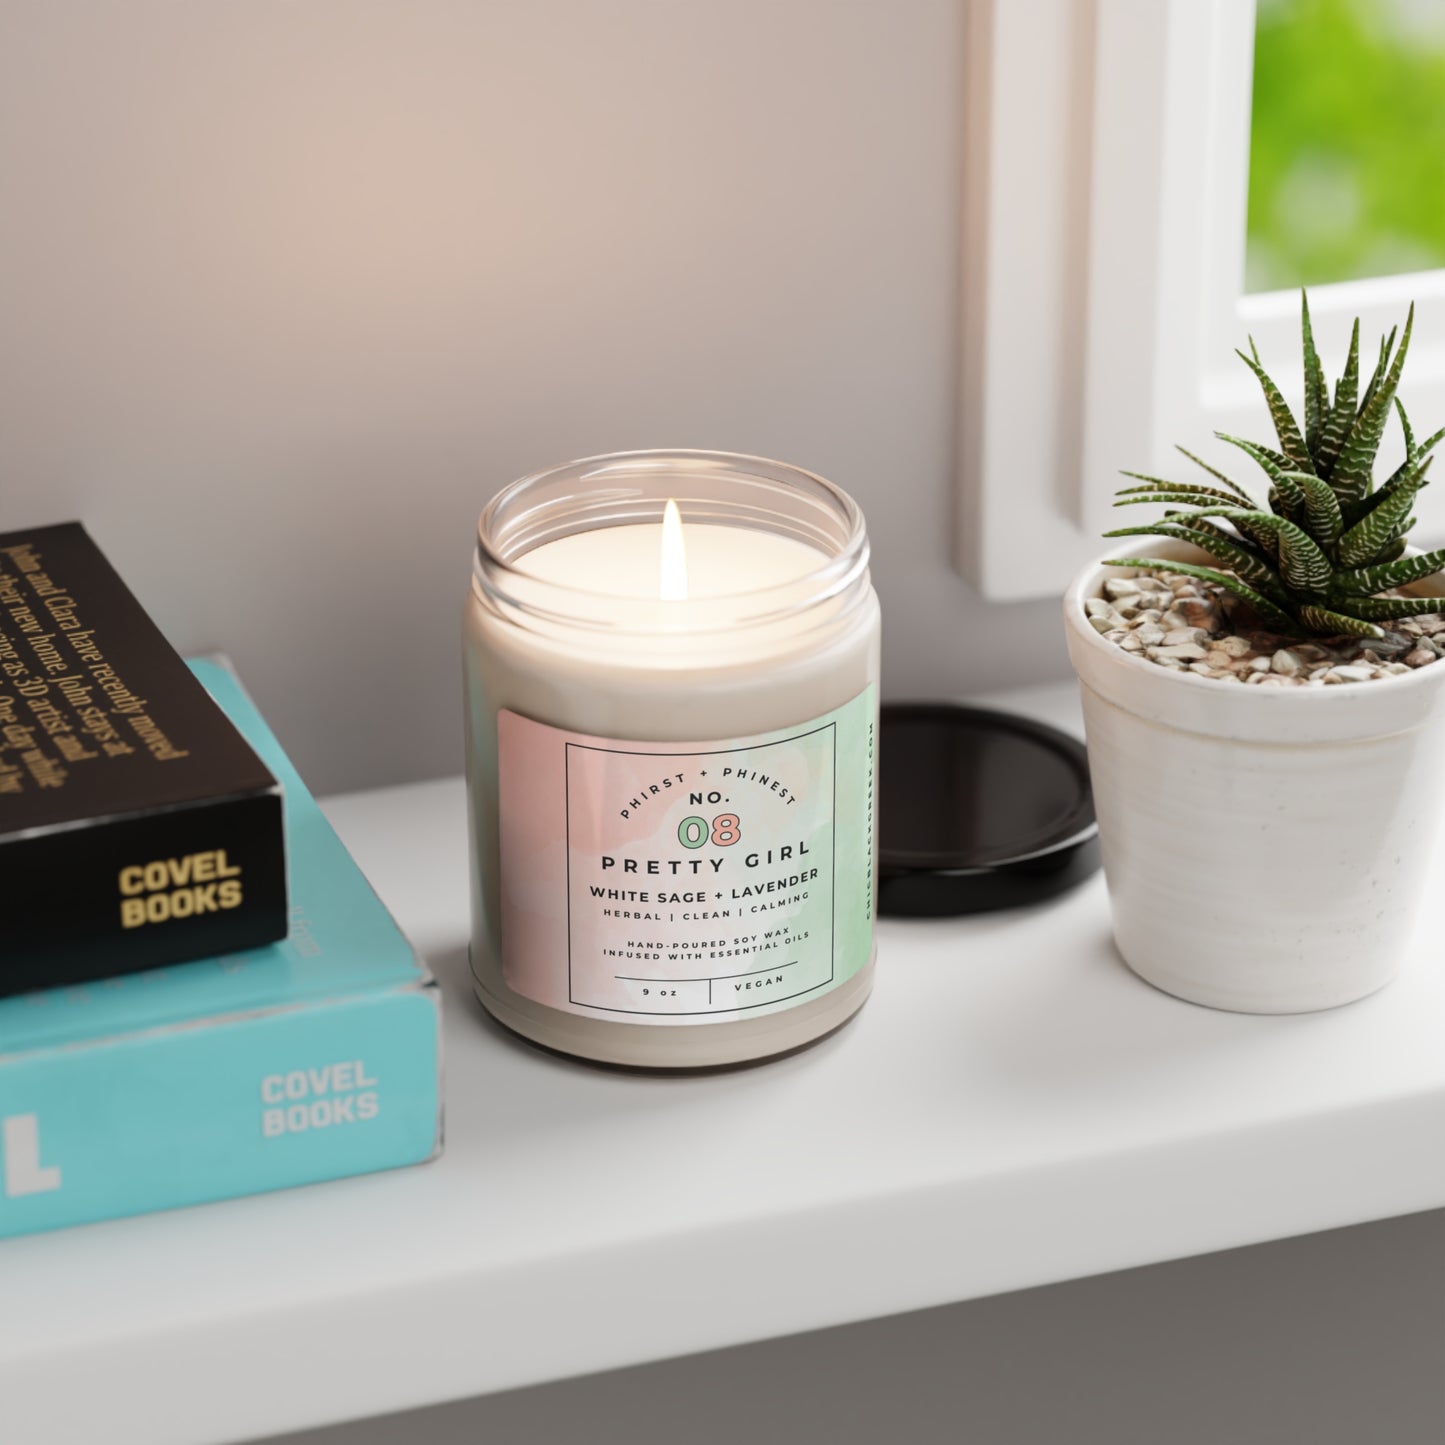 No. 08 Phirst + Phinest Pretty Girl Candle | White Sage + Lavender